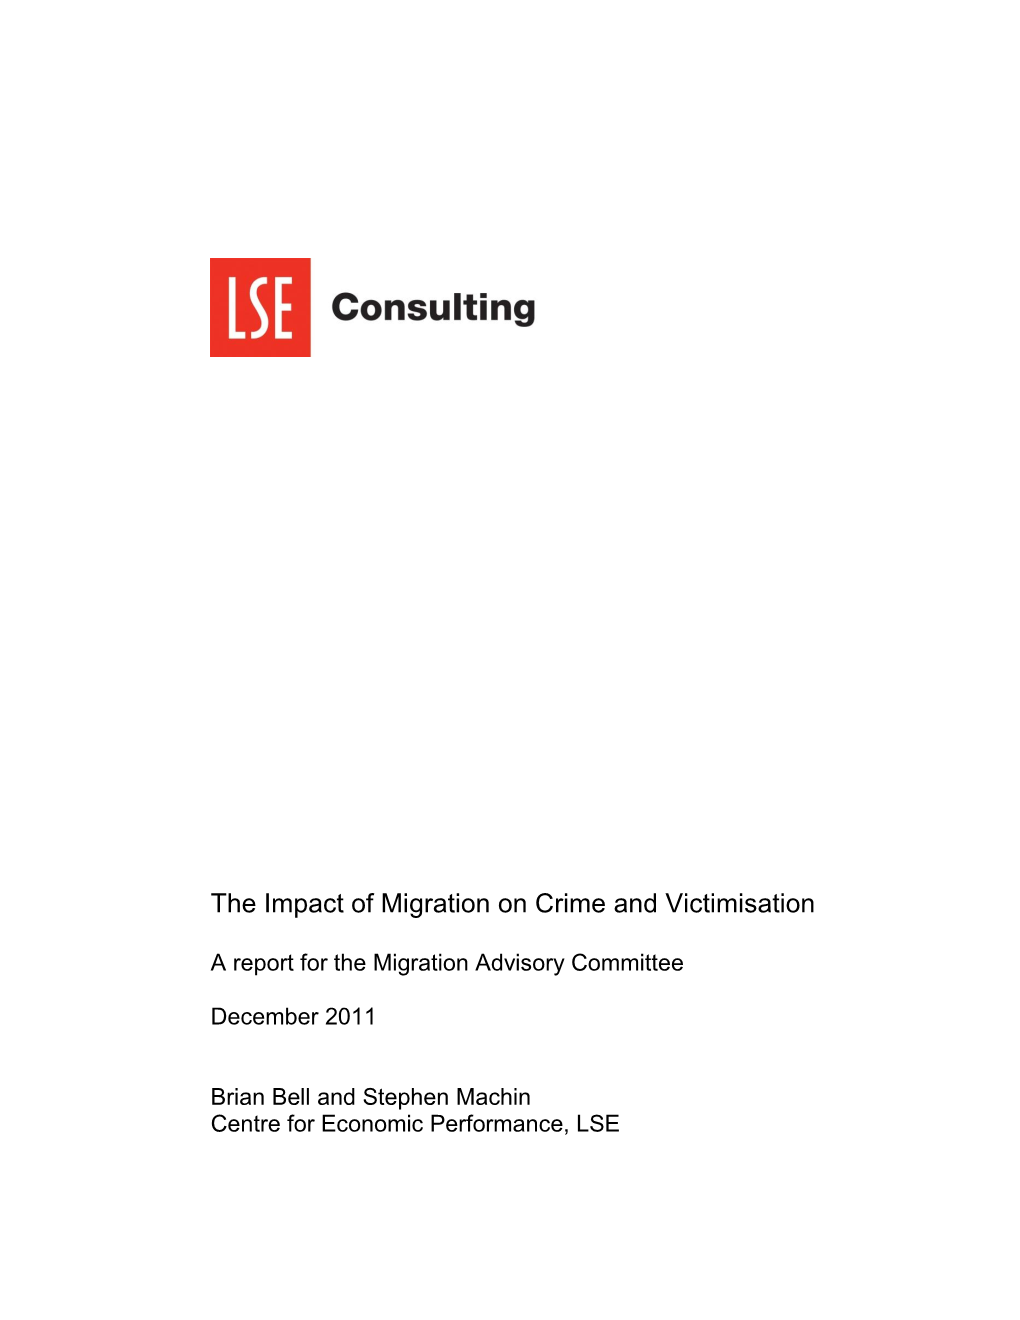 The Impact of Migration on Crime and Victimisation